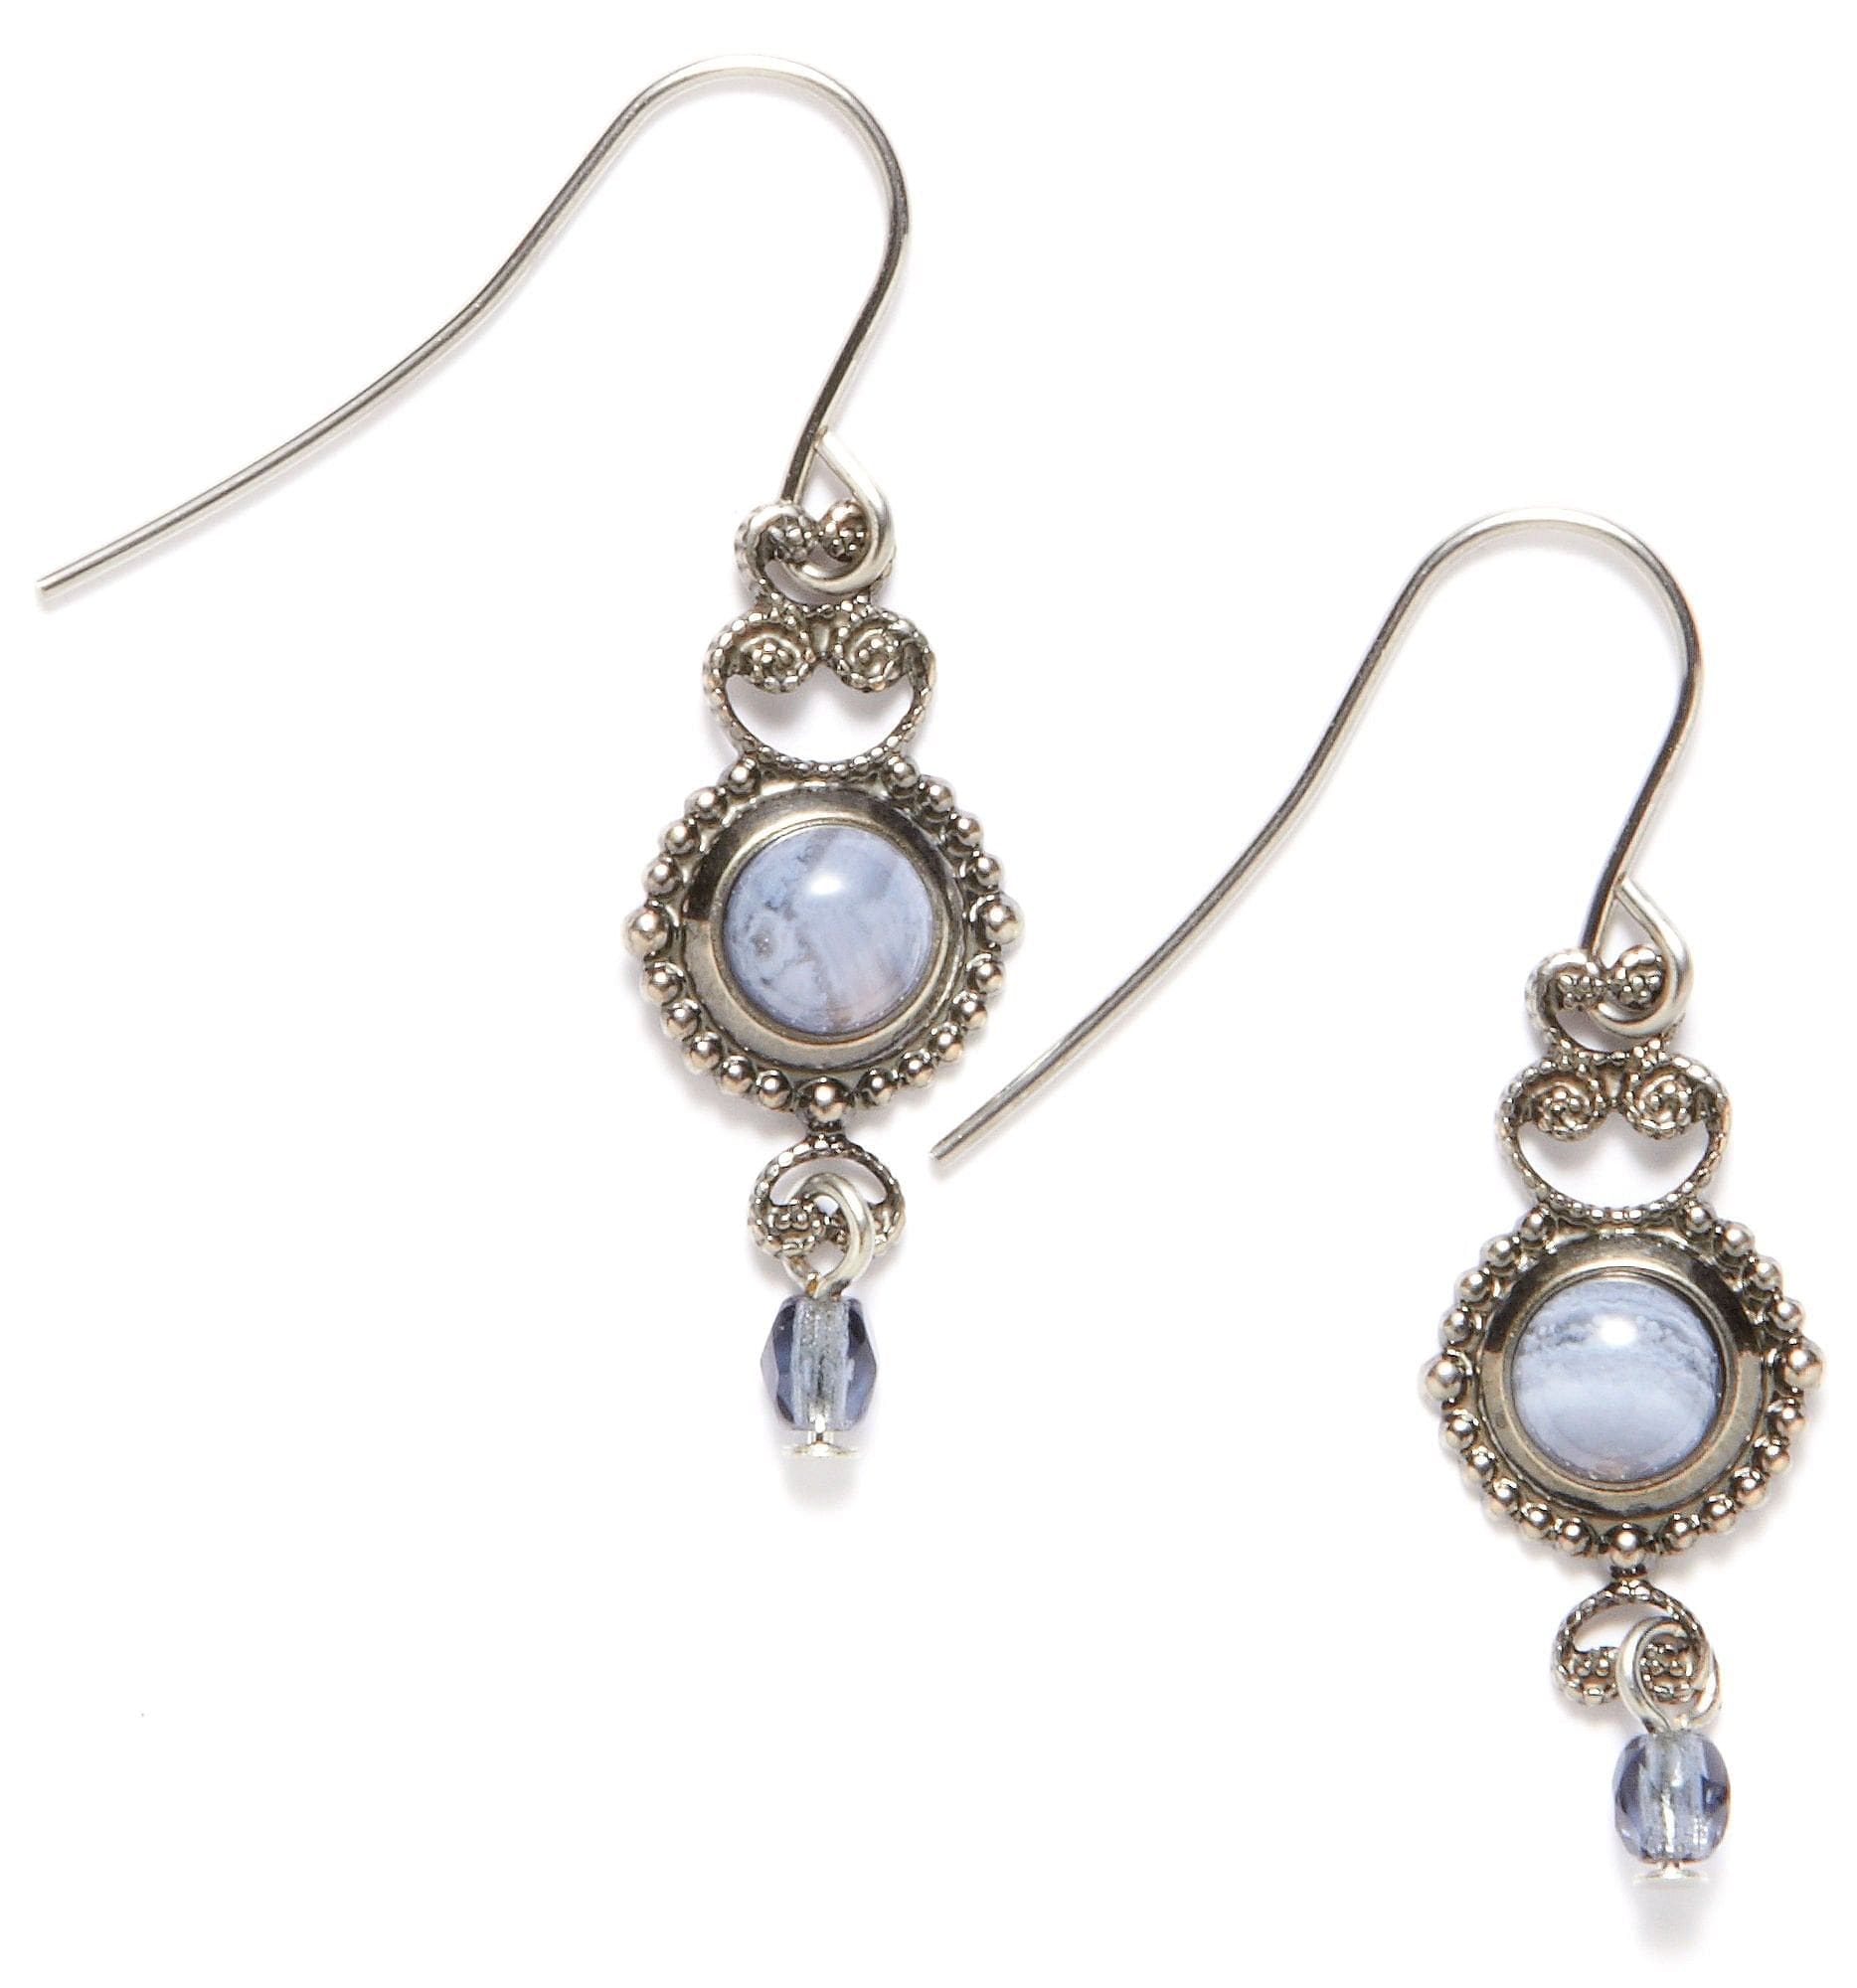 Blue Lace Agate Earrings - Shelburne Country Store